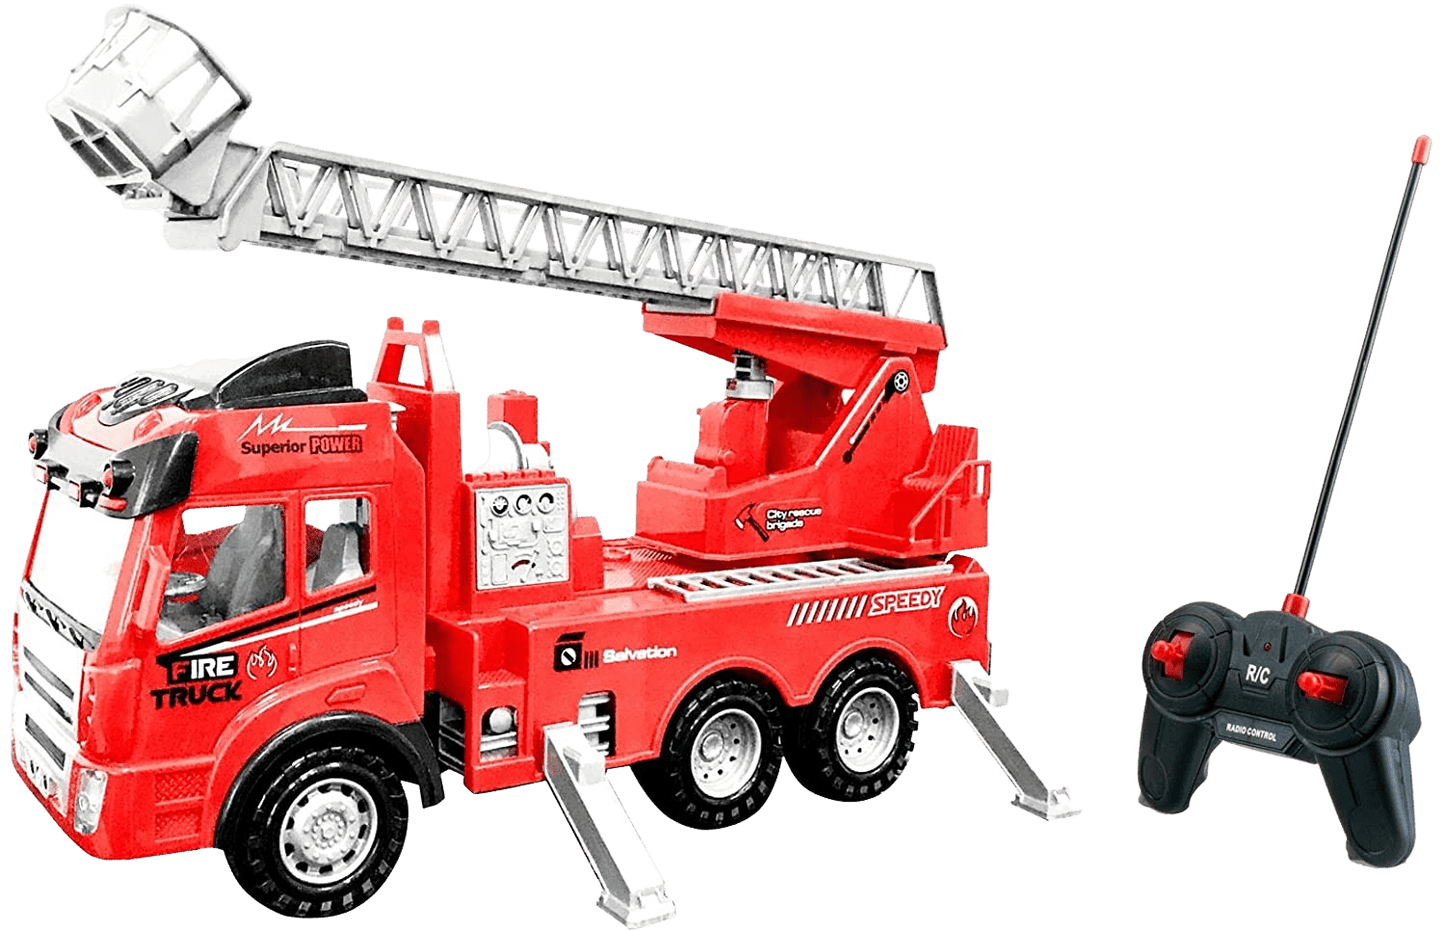 Toy Rc Rescue Fire Engine Truck Multi-Function Remote Control w/ Extending Ladder, by Bo Toys | Decor Gifts and More